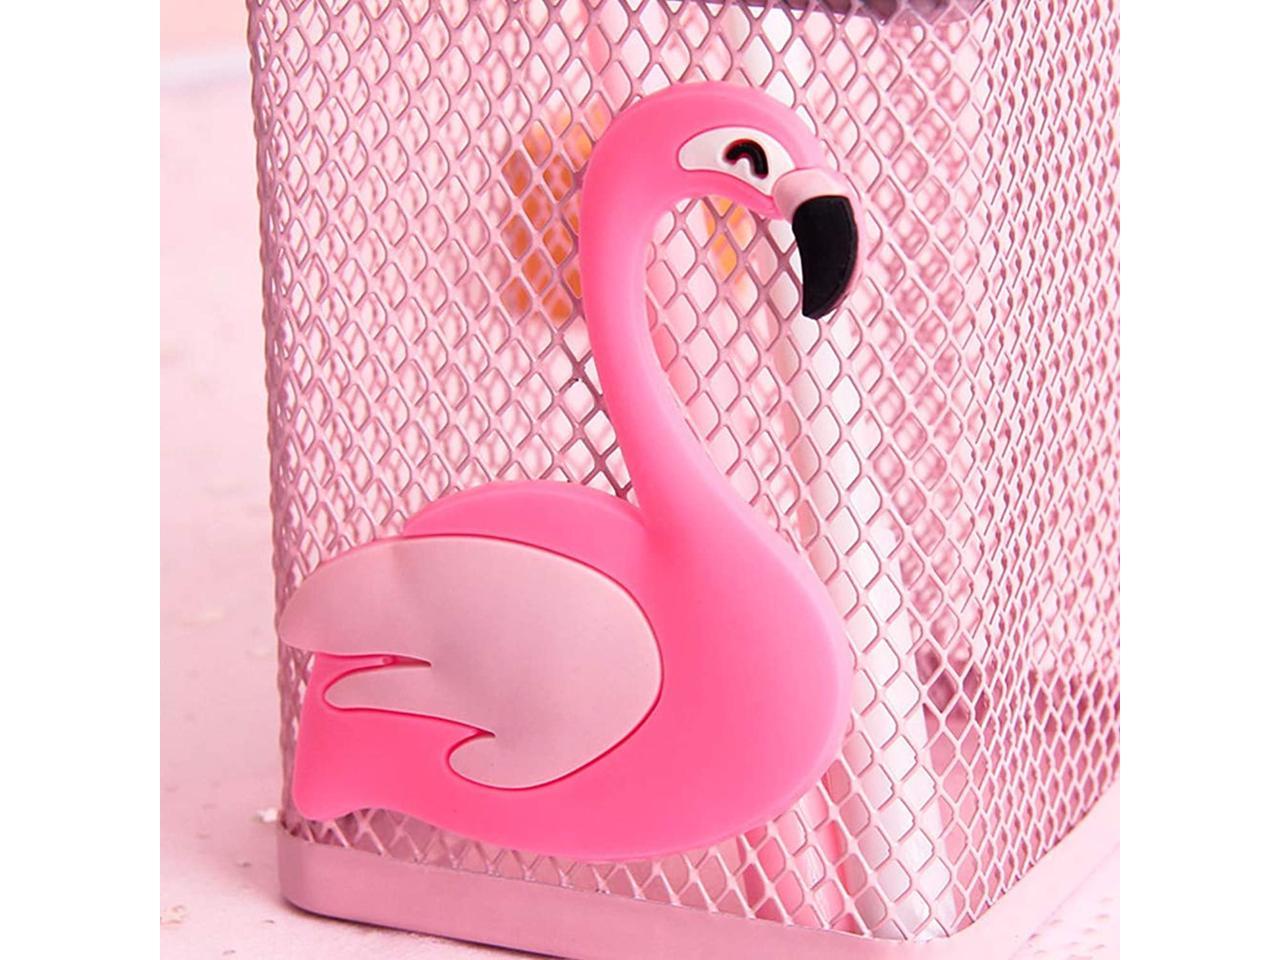 Trycooling 2 Pack Metal Cute Pen Pencil Holder Office Home Desk Square Pencil Cup Caddy Box Makeup Brush Holders for Girls Flamingo